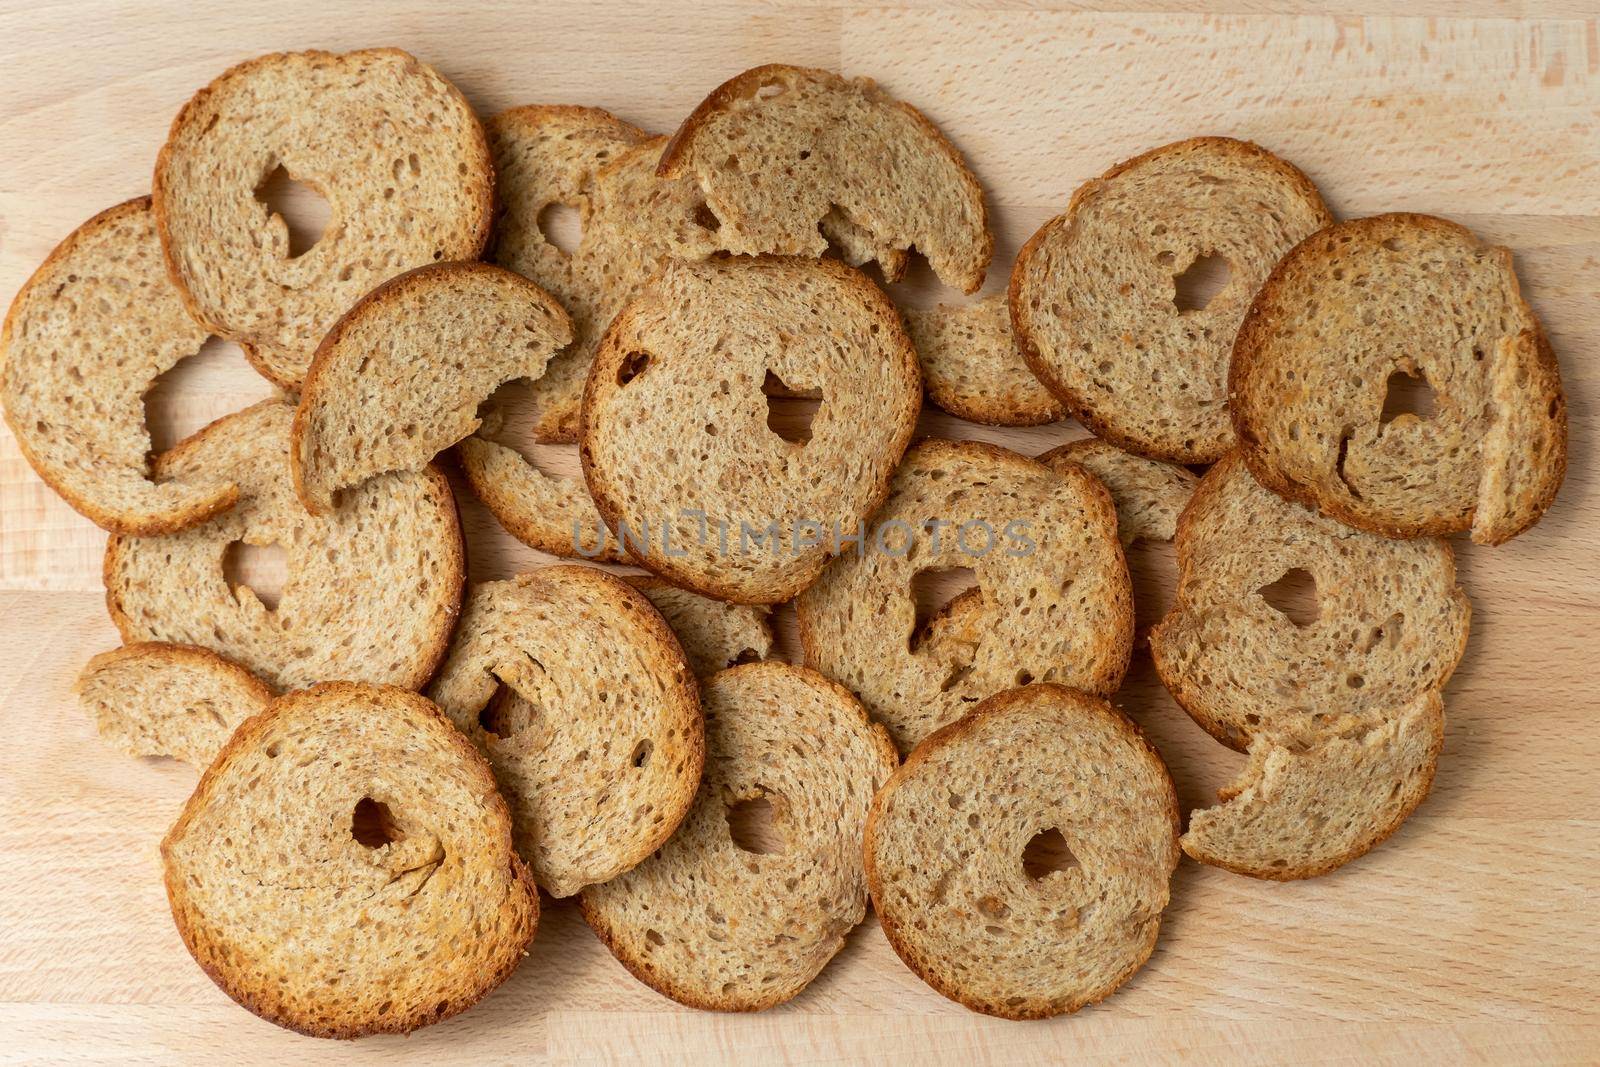 Mini rolls of baked bread on wooden background. Bread chips.